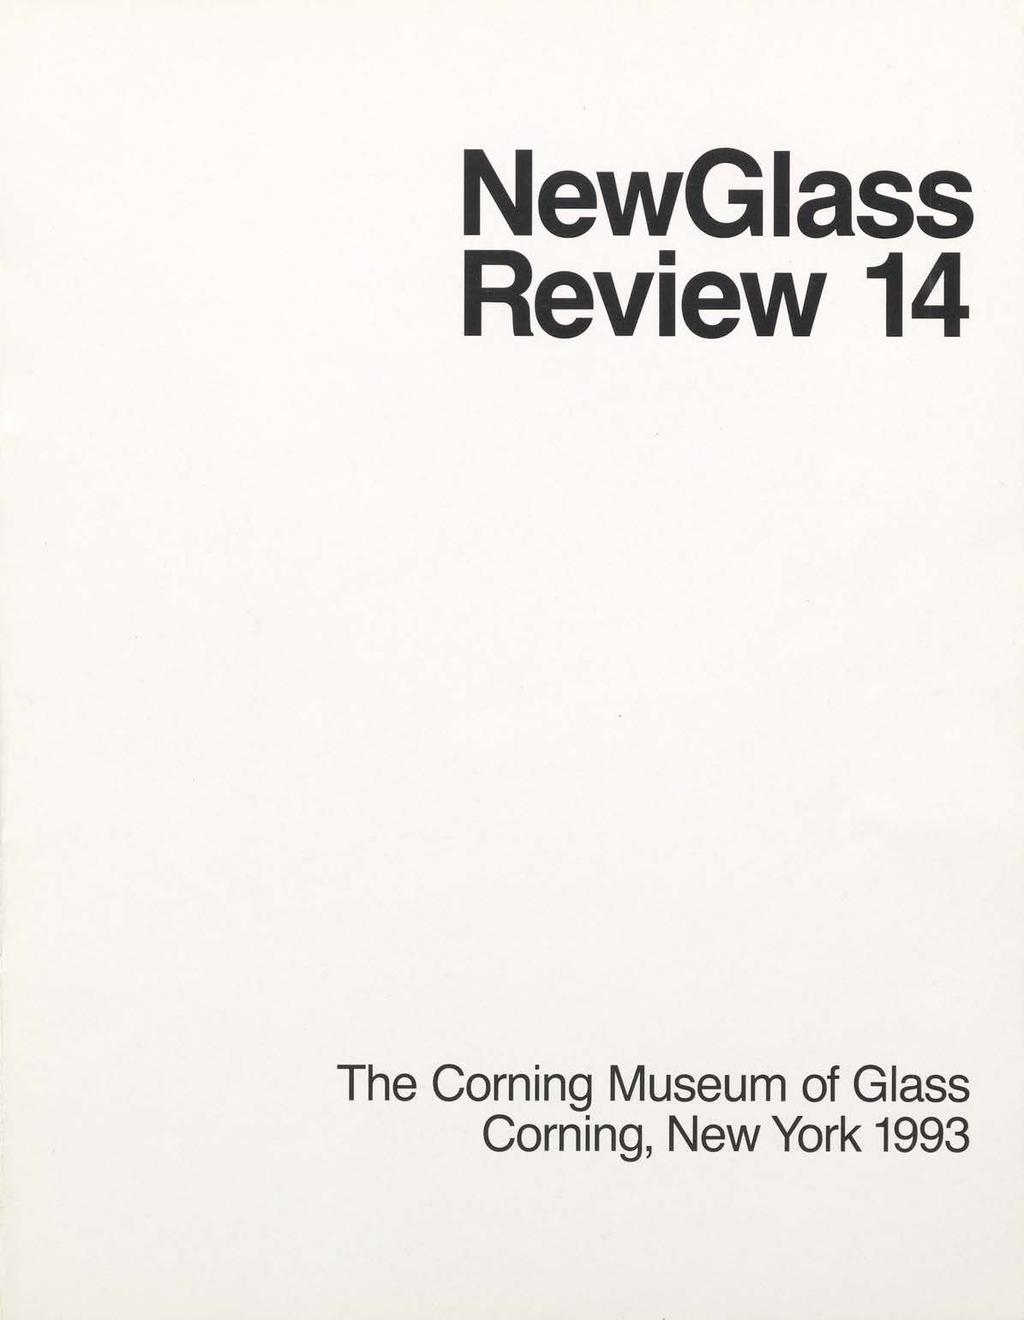 NewG lass Review 14 The Corning